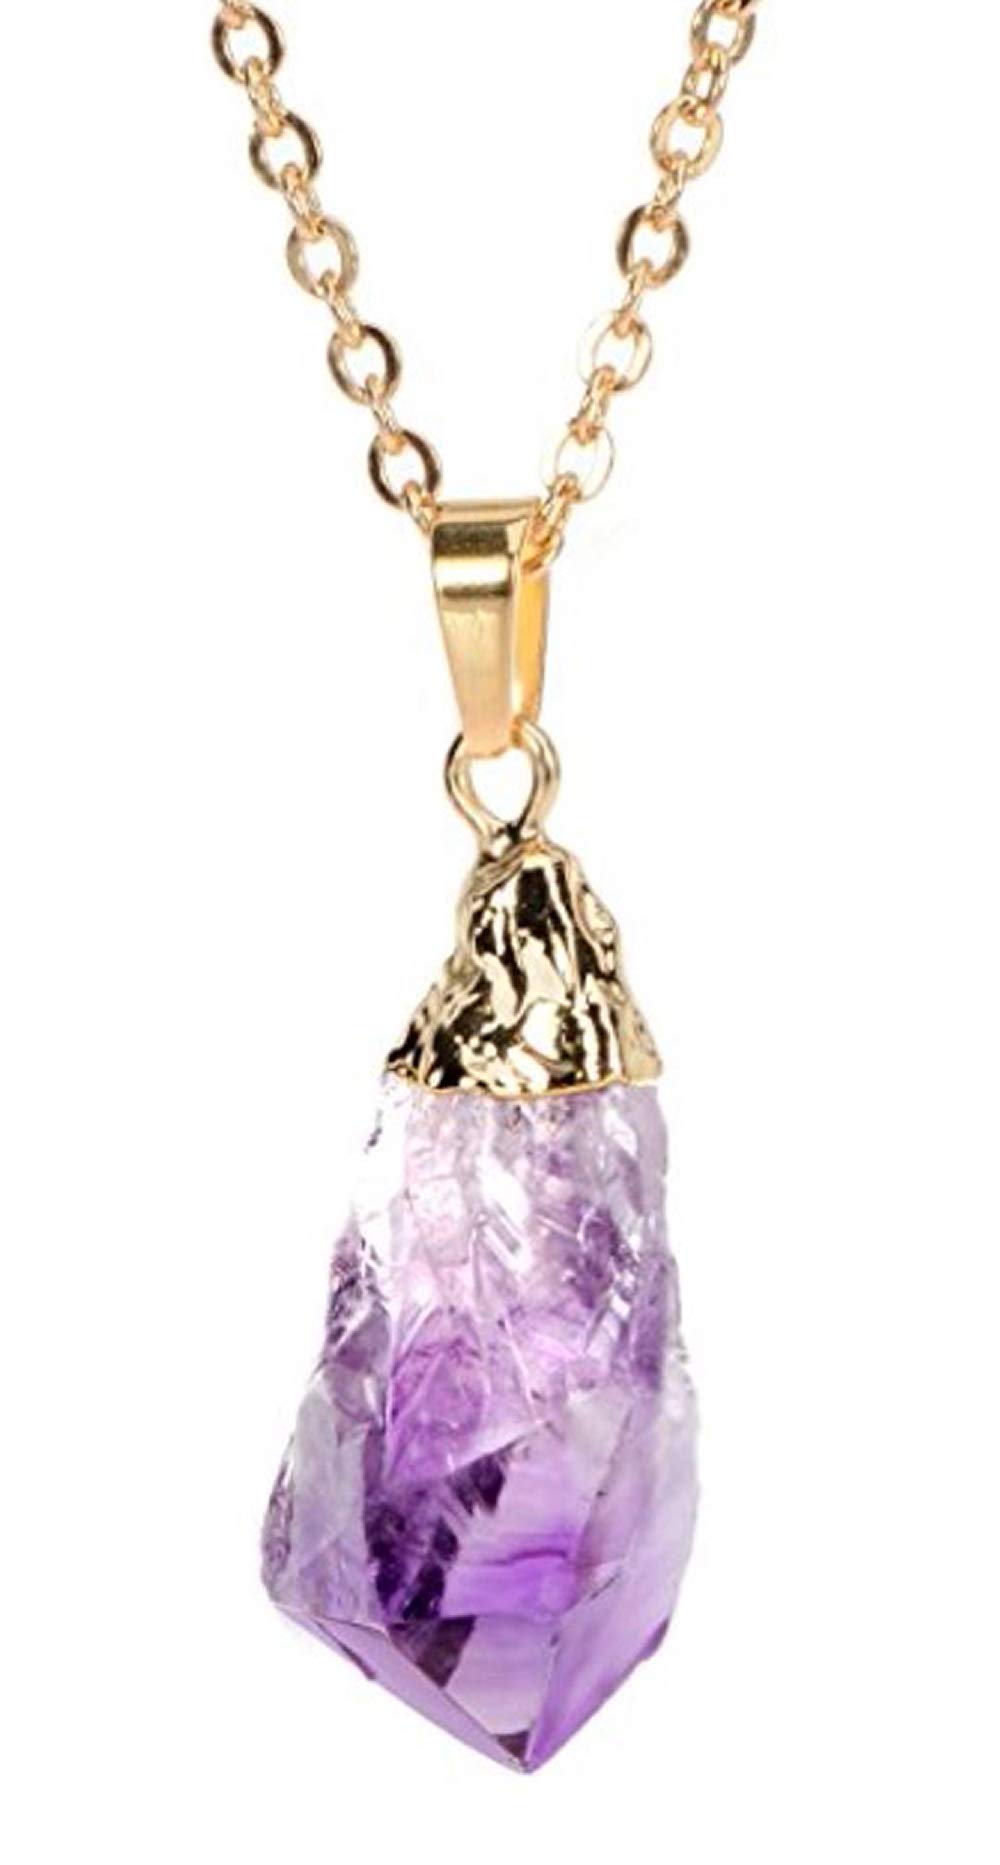 Adabele 1pc Authentic Sterling Silver Raw Amethyst Citrine Gemstone Necklace 18 inch Healing Crystal Chakra Stone Hypoallergenic Nickel Free Women Girl Birthday Gift